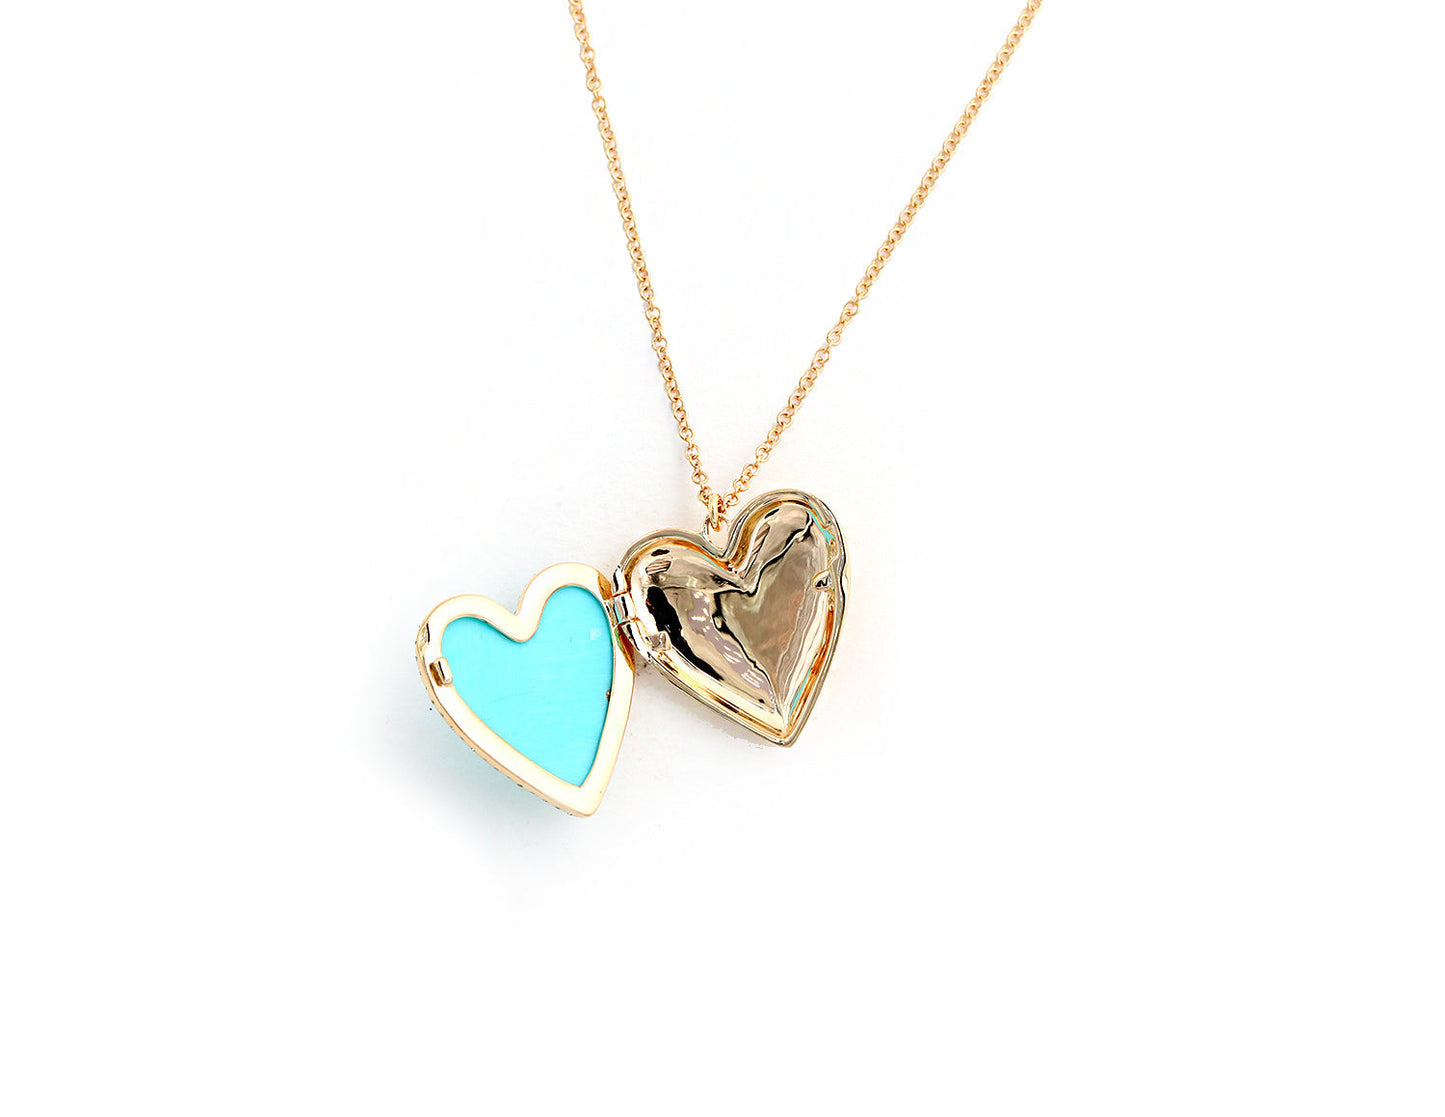 14k Yellow Gold and Turquoise Heart Locket